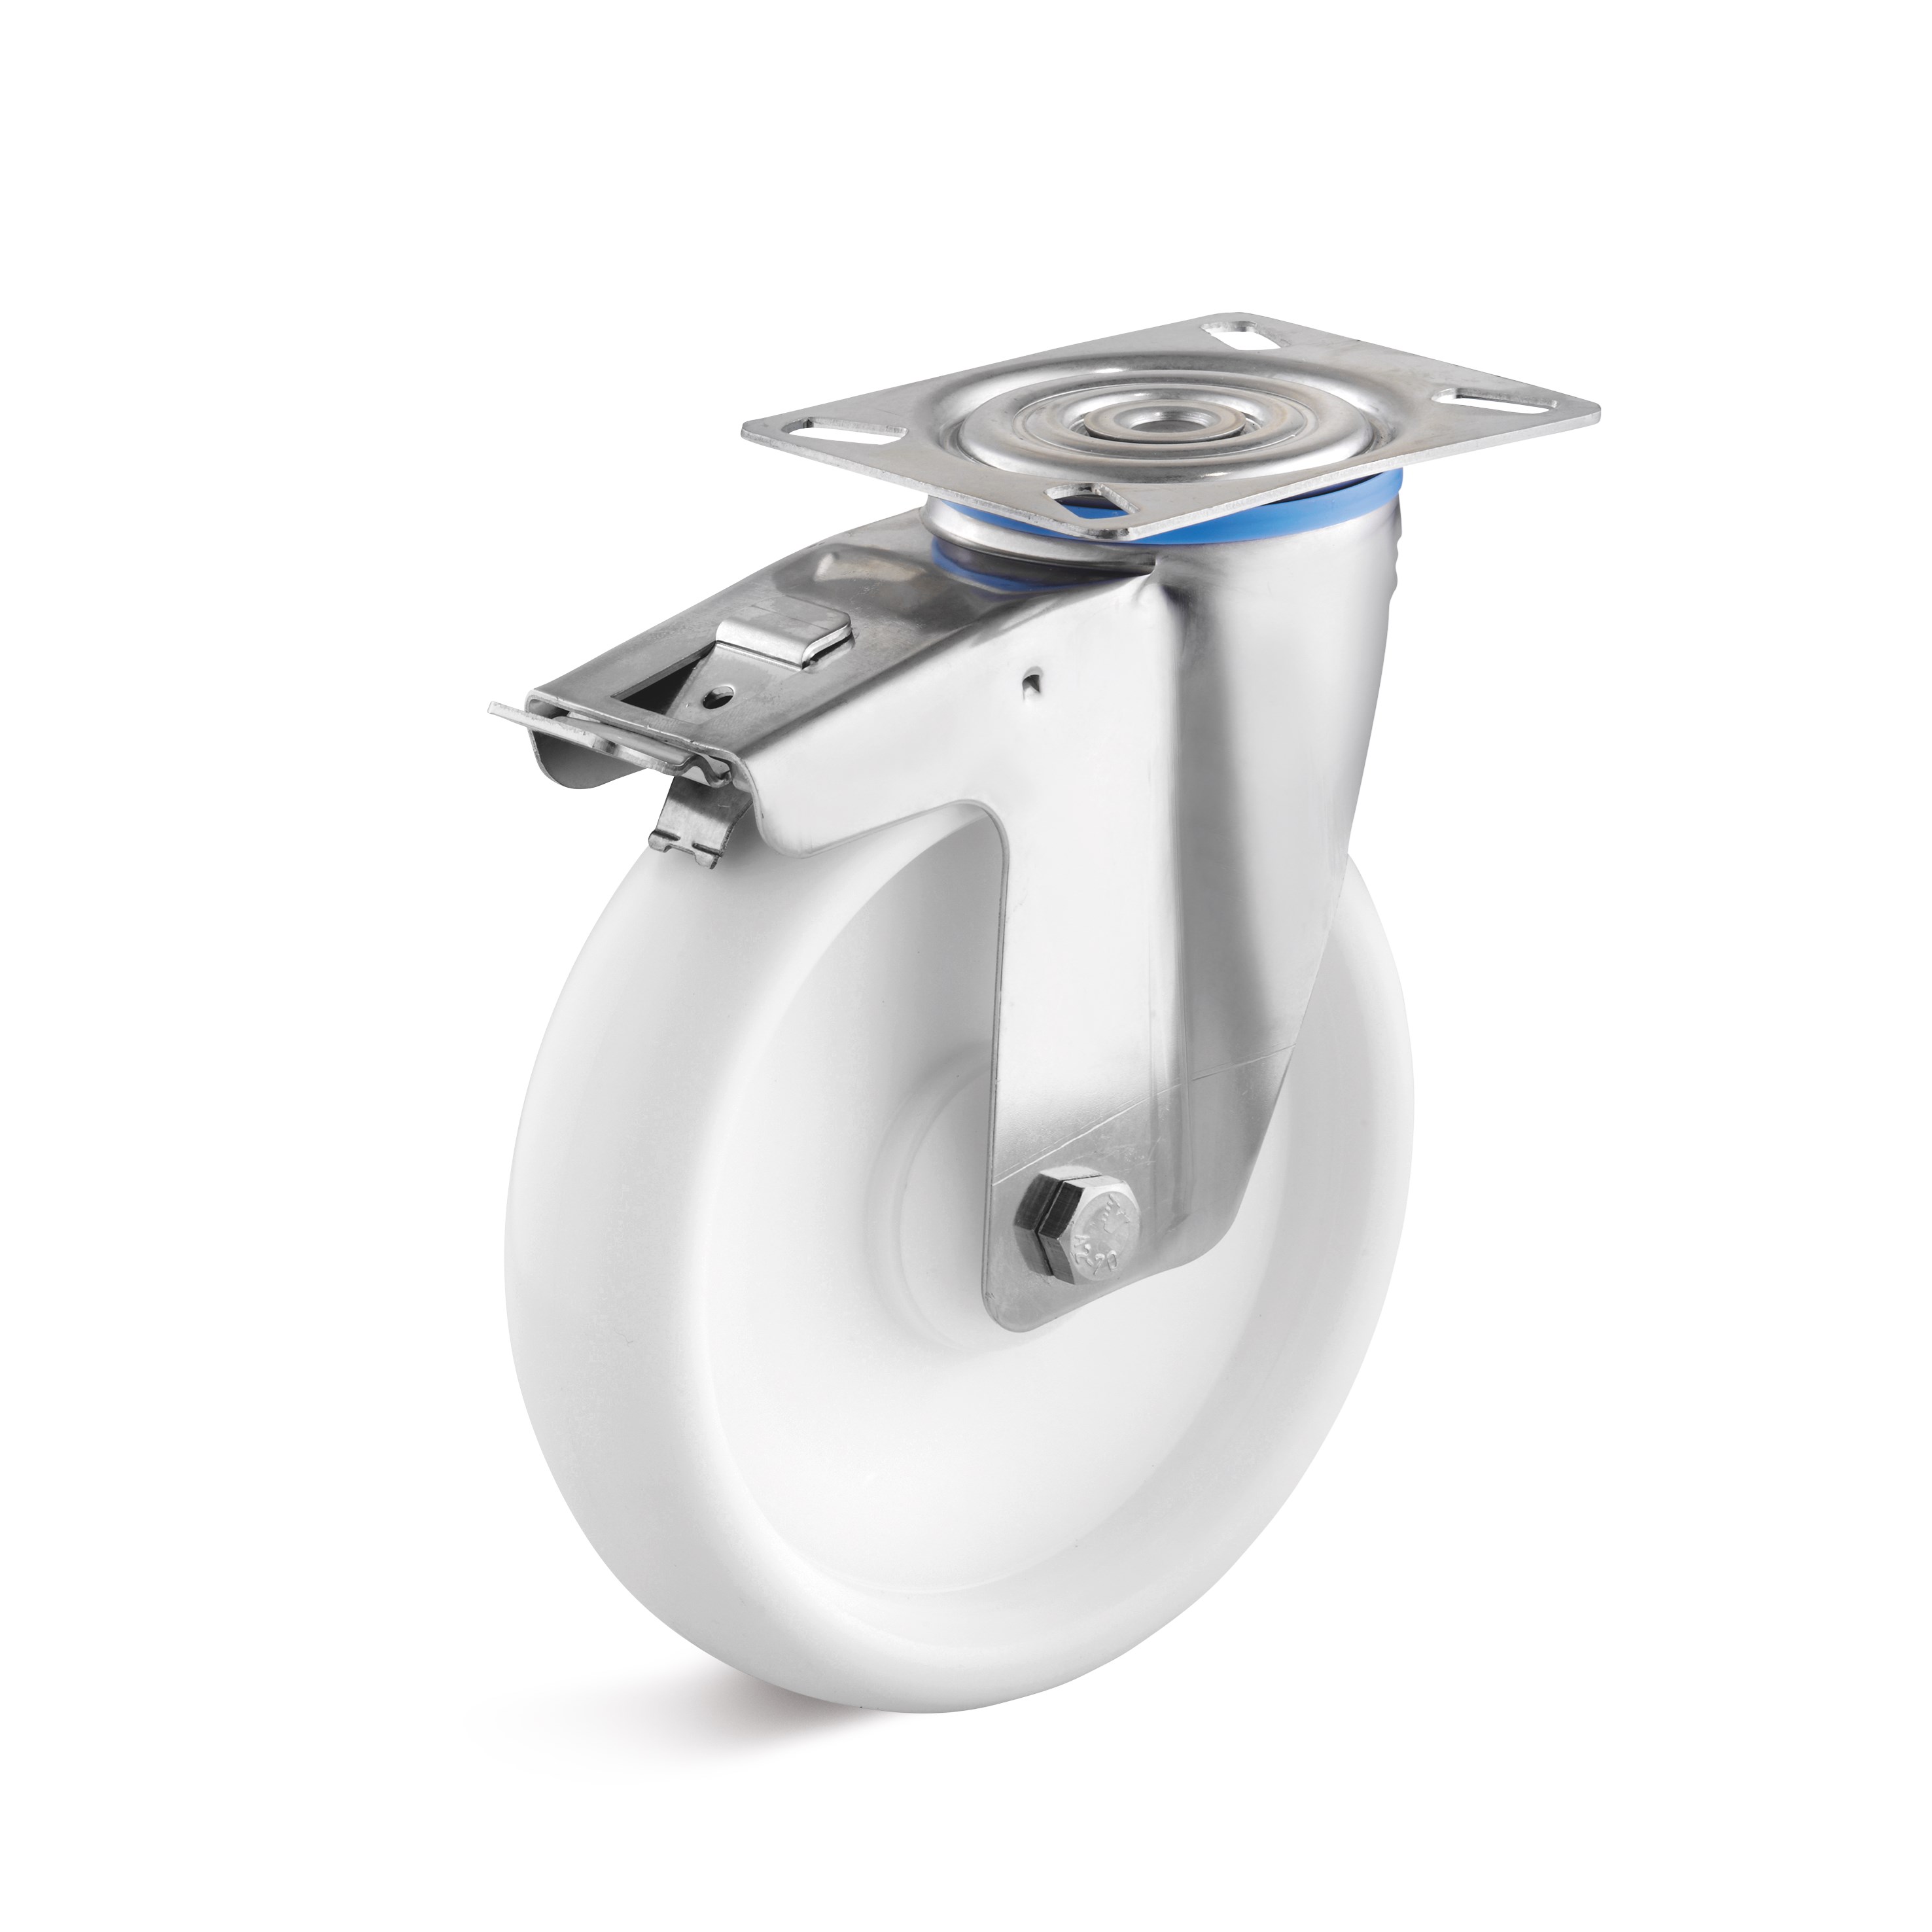 Stainless steel swivel castor with double stop and polypropylene wheel